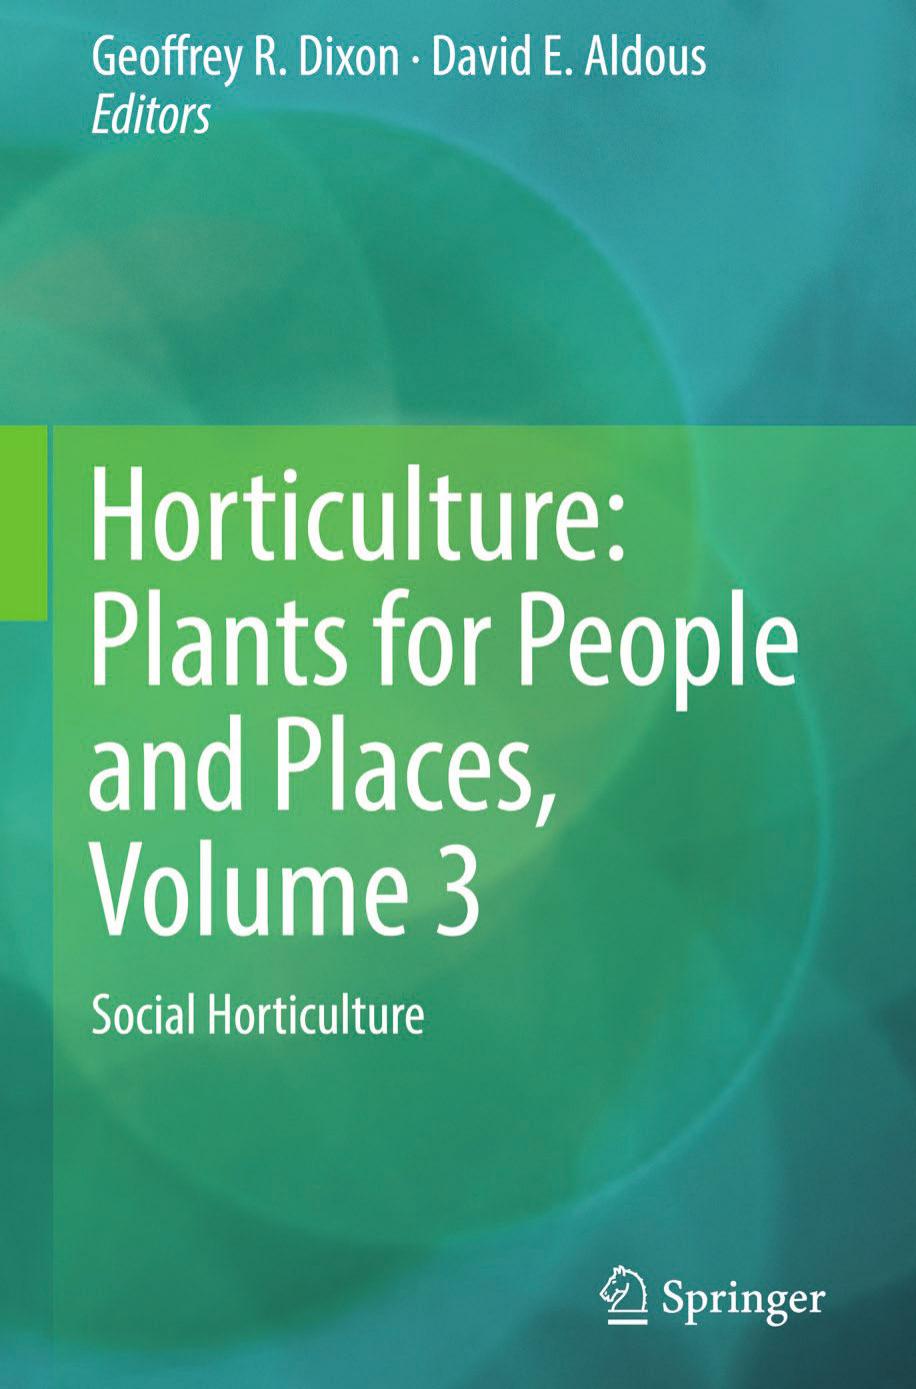 Horticulture  Plants for People and Places, Volume 3  Social Horticulture 2014